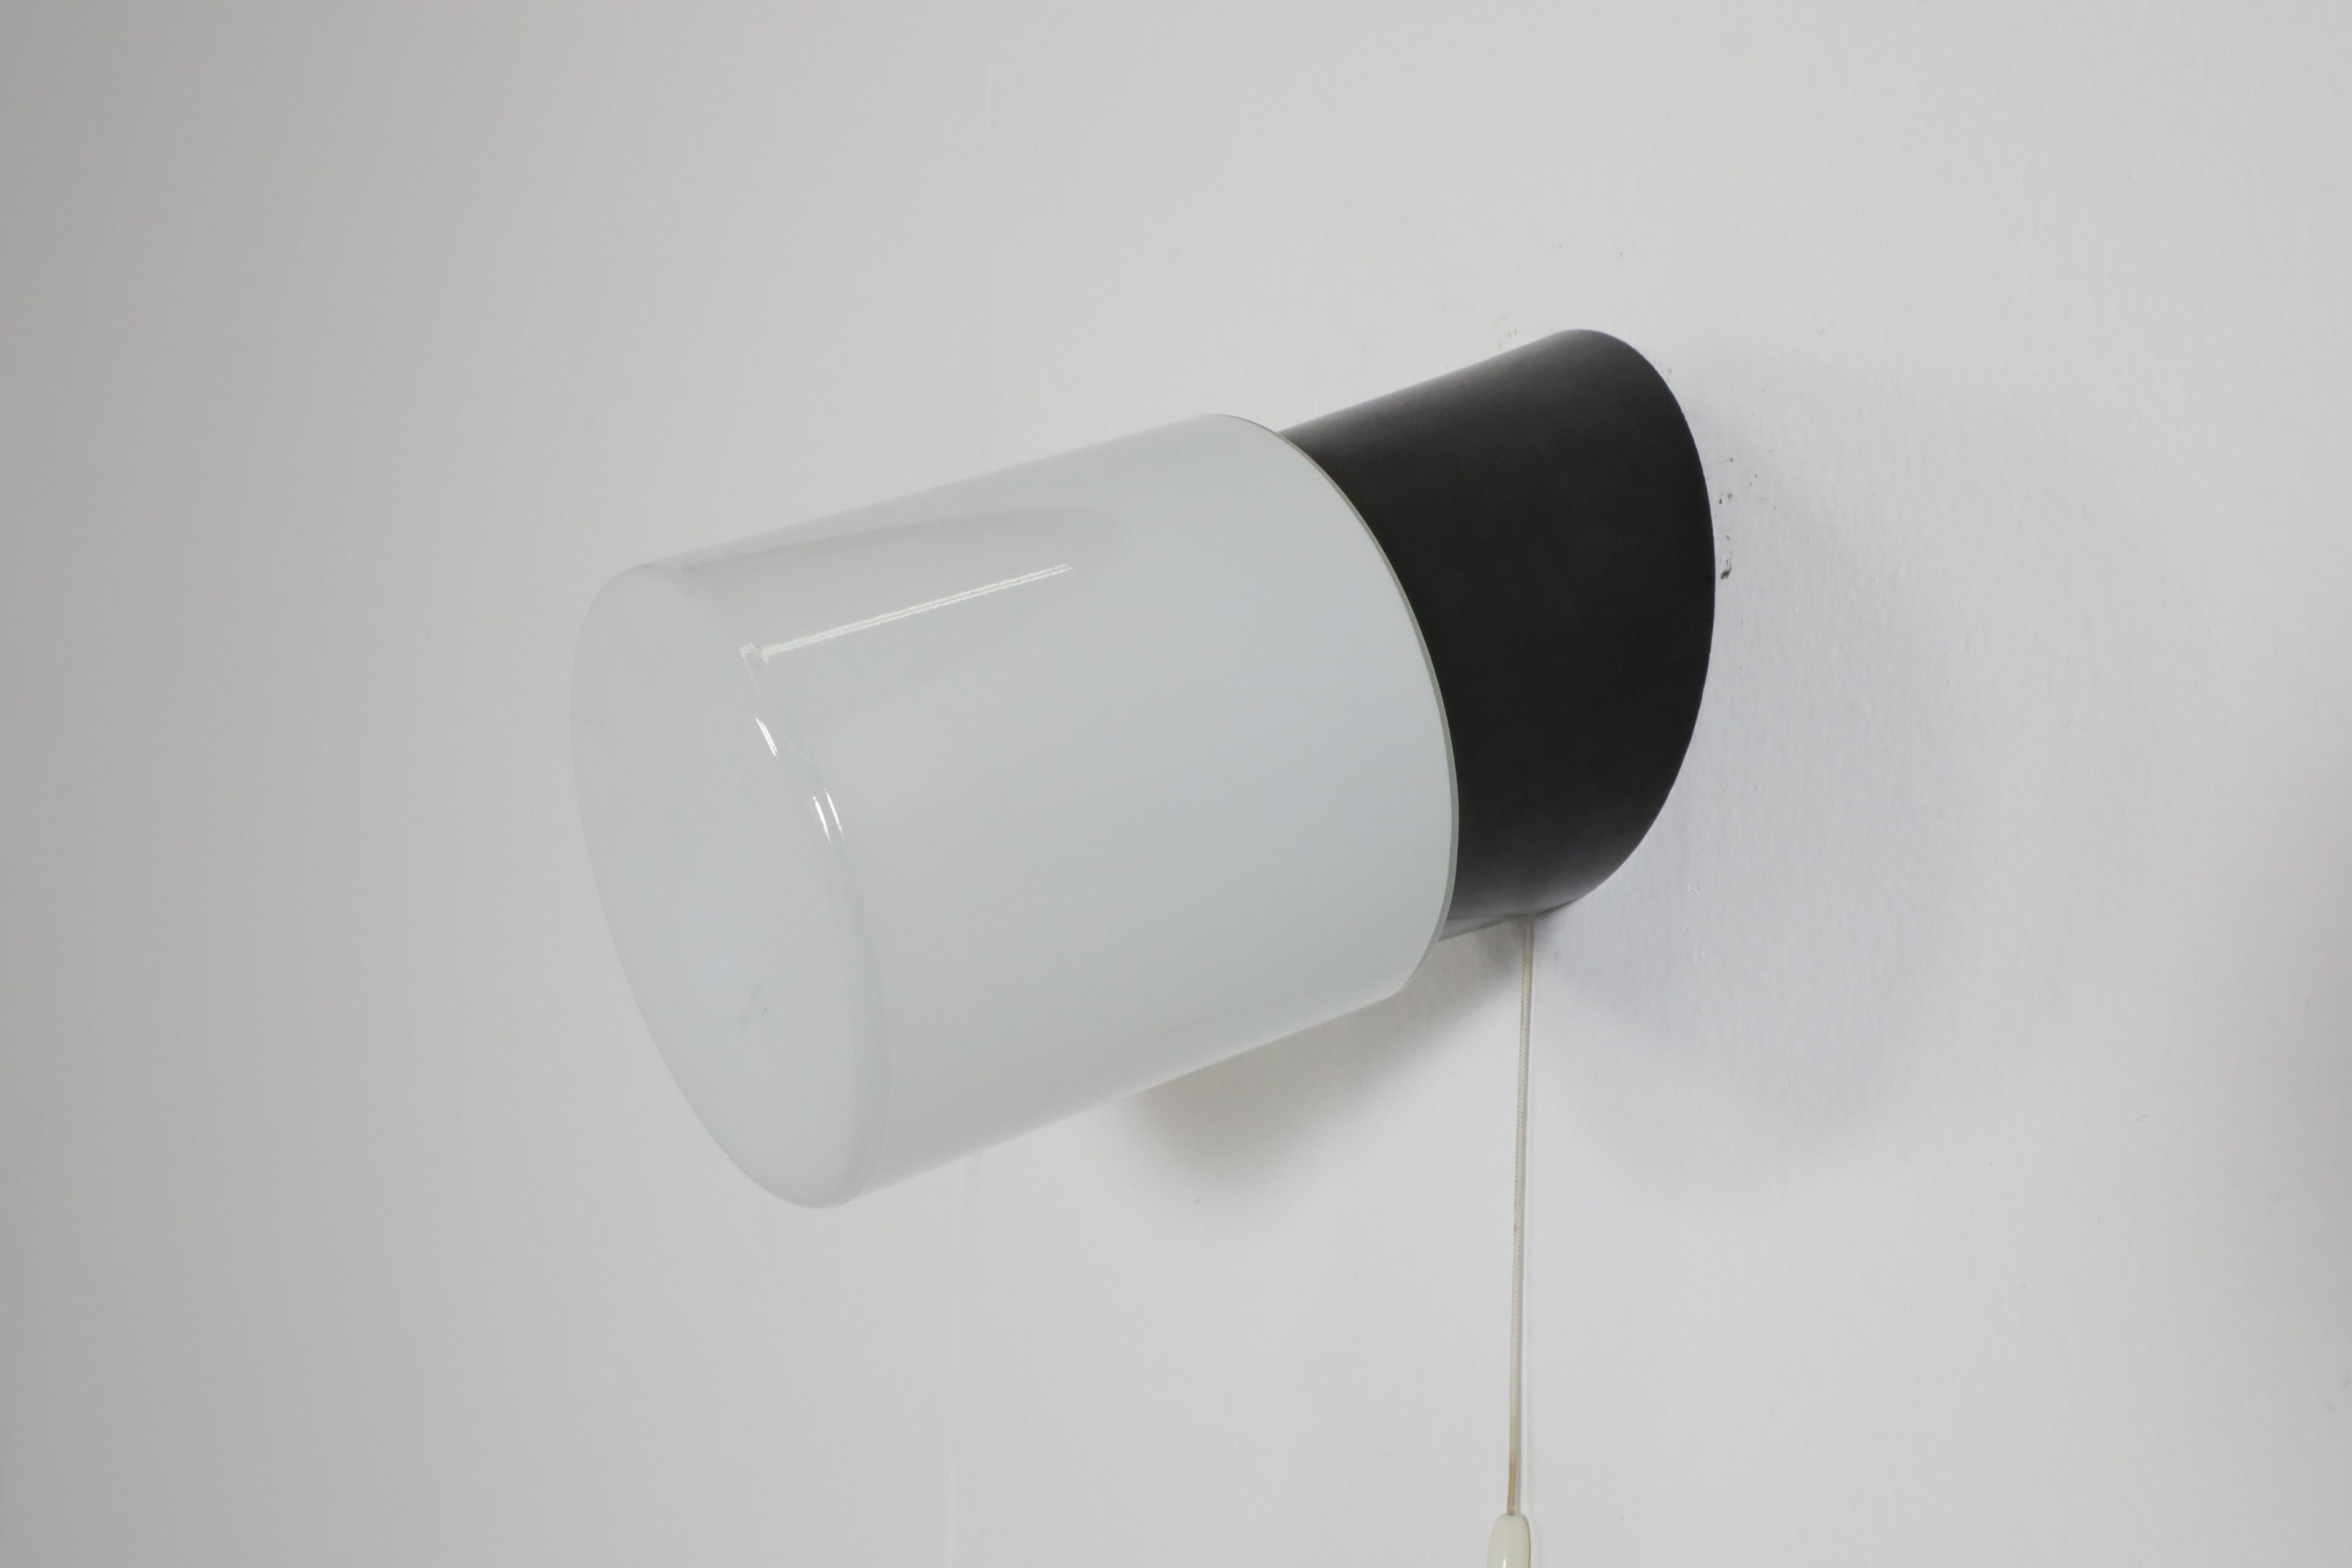 Cylinder Milk Glass Sconce with Black Bakelite Base and Pull String Switch For Sale 7